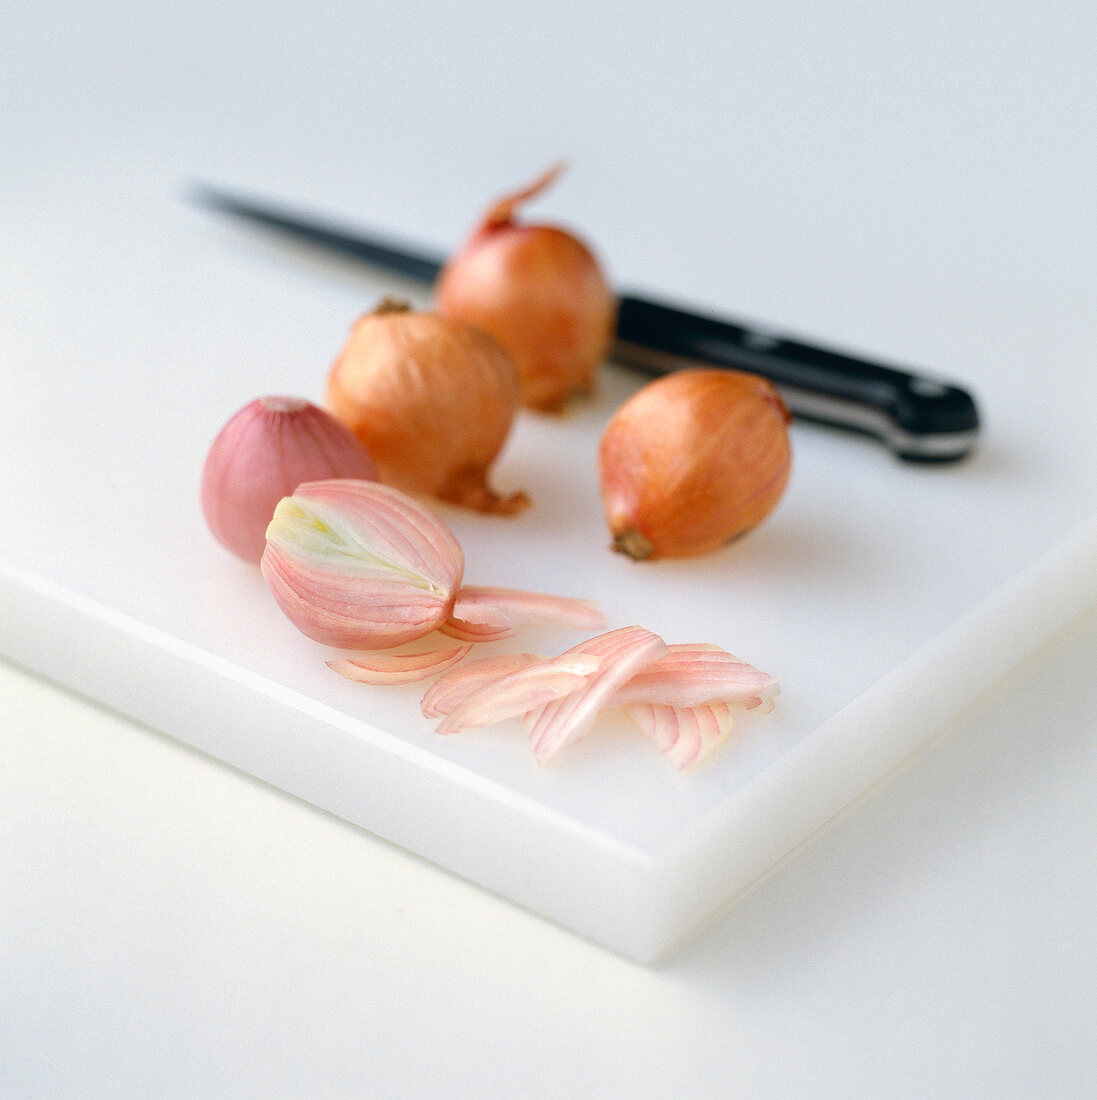 Shallots with knife